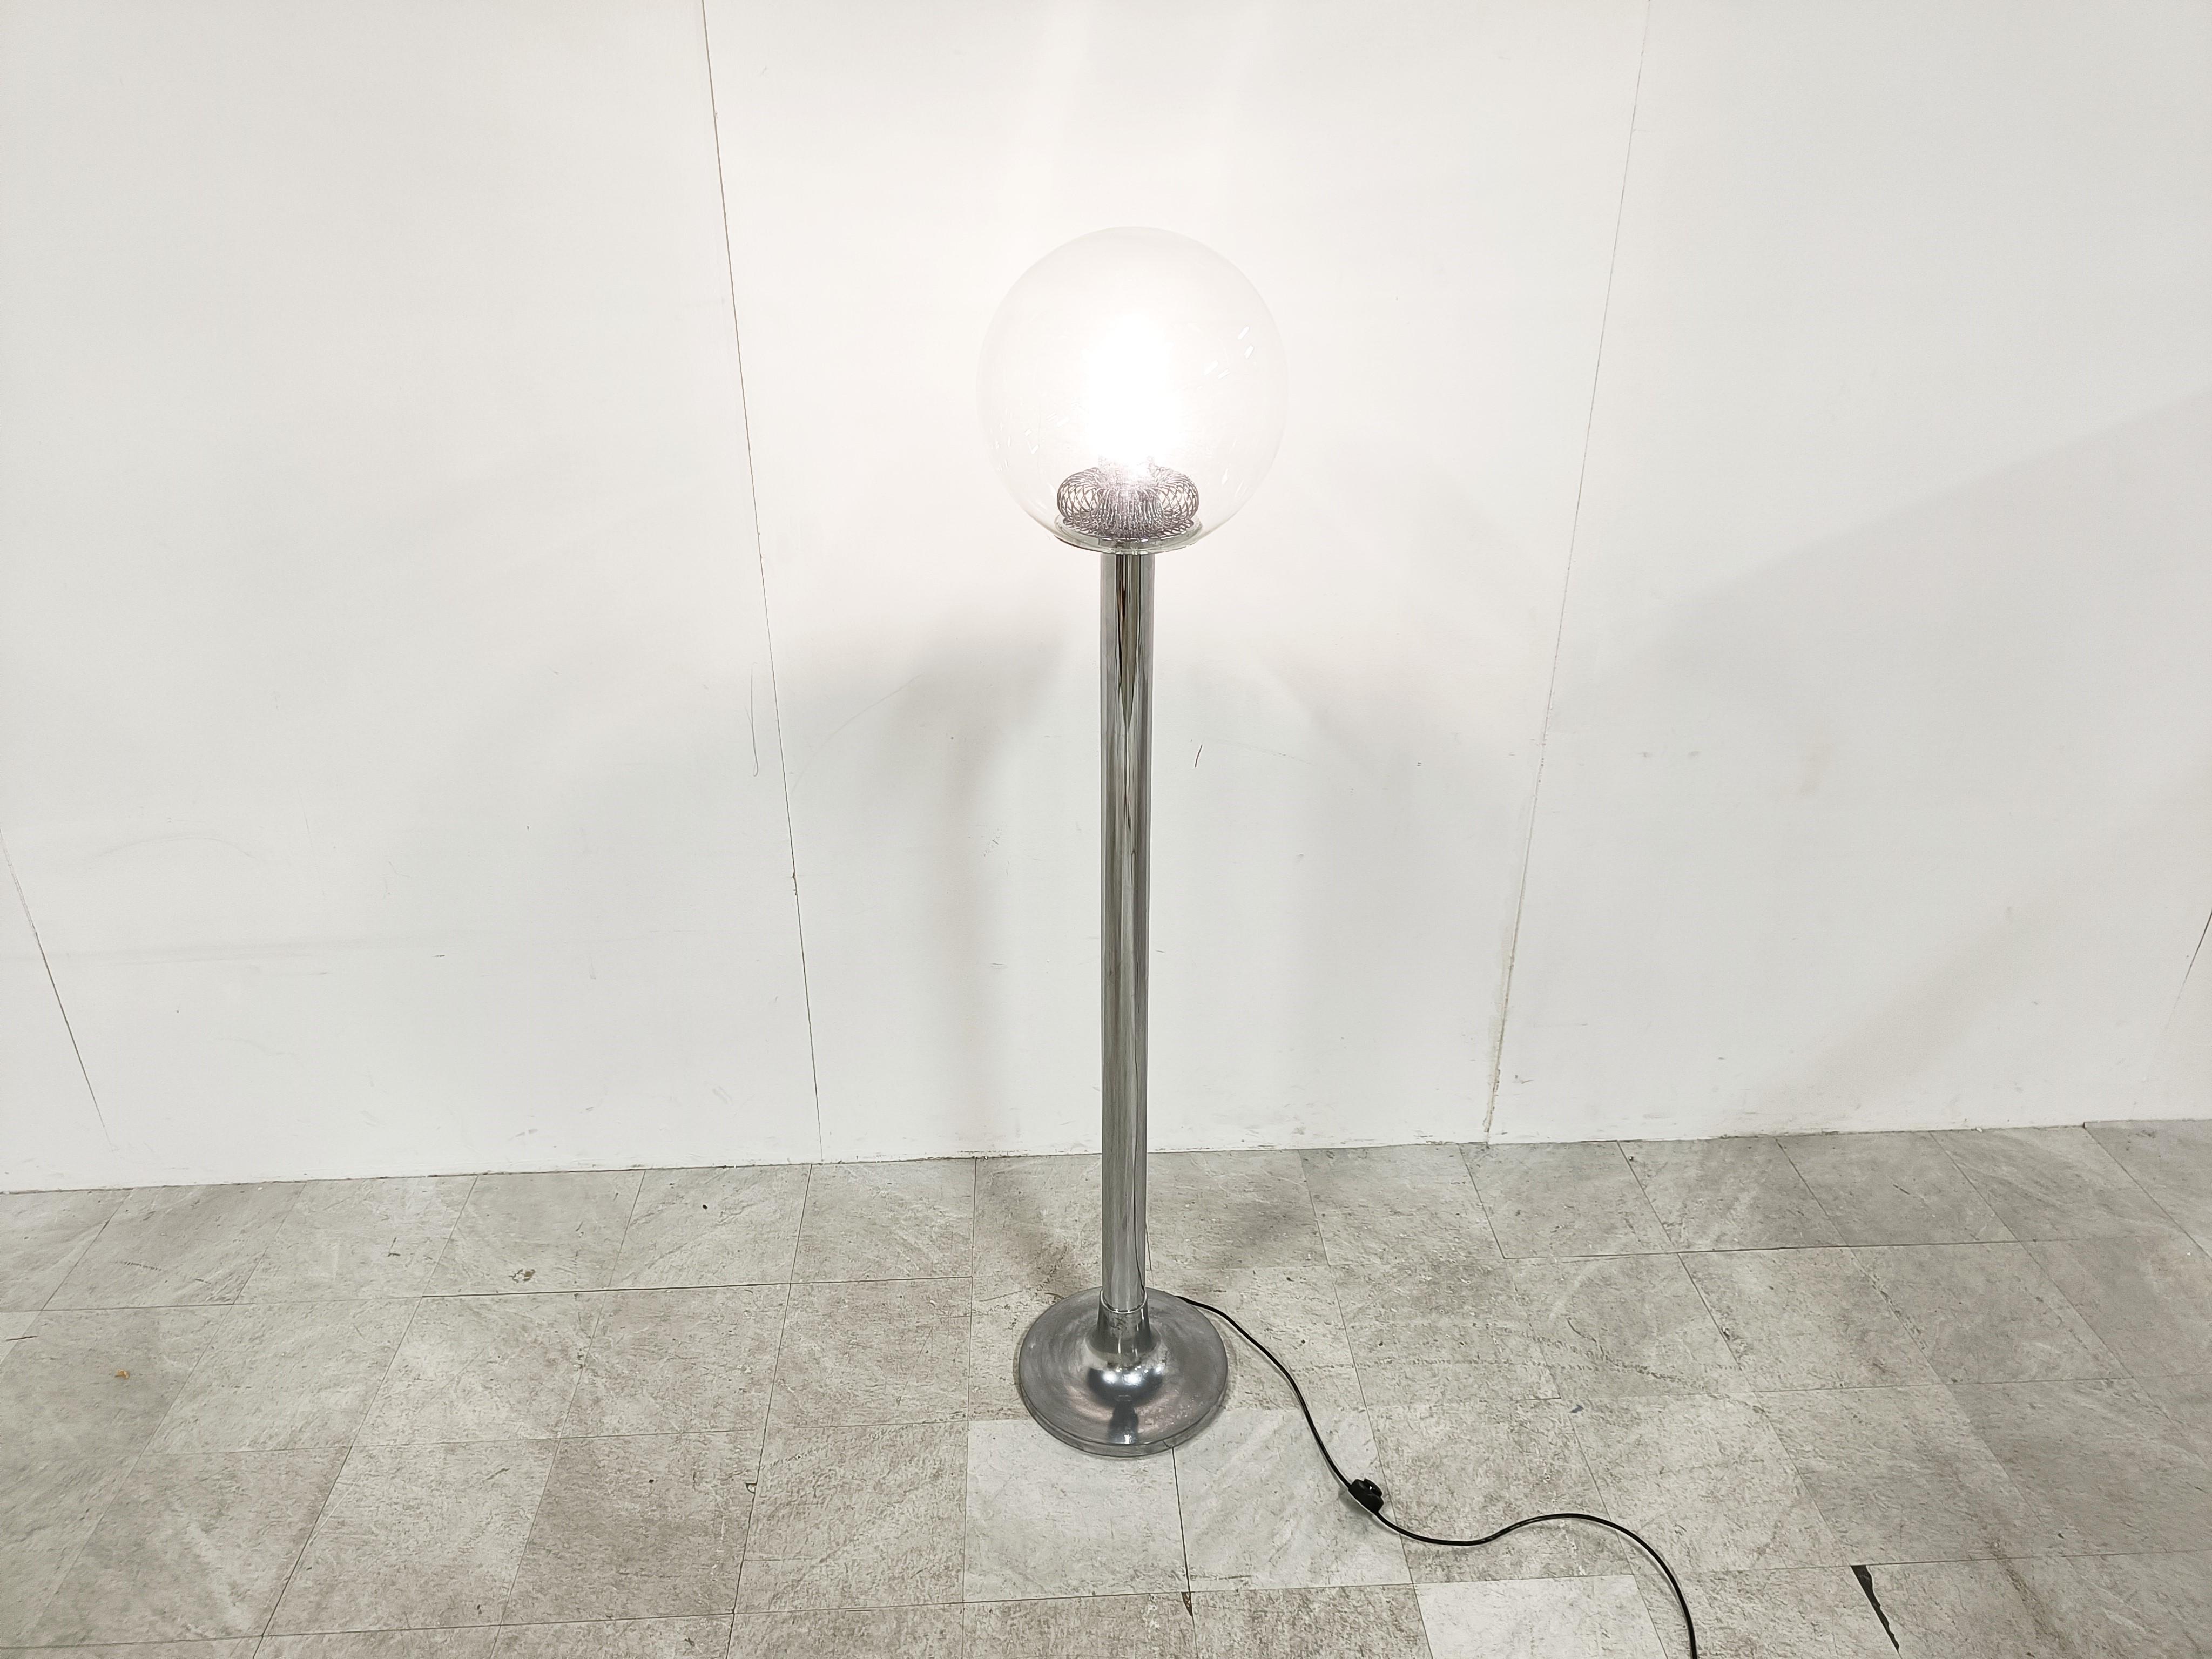 Vintage Chrome and Glass Floor Lamp, 1970s For Sale 2